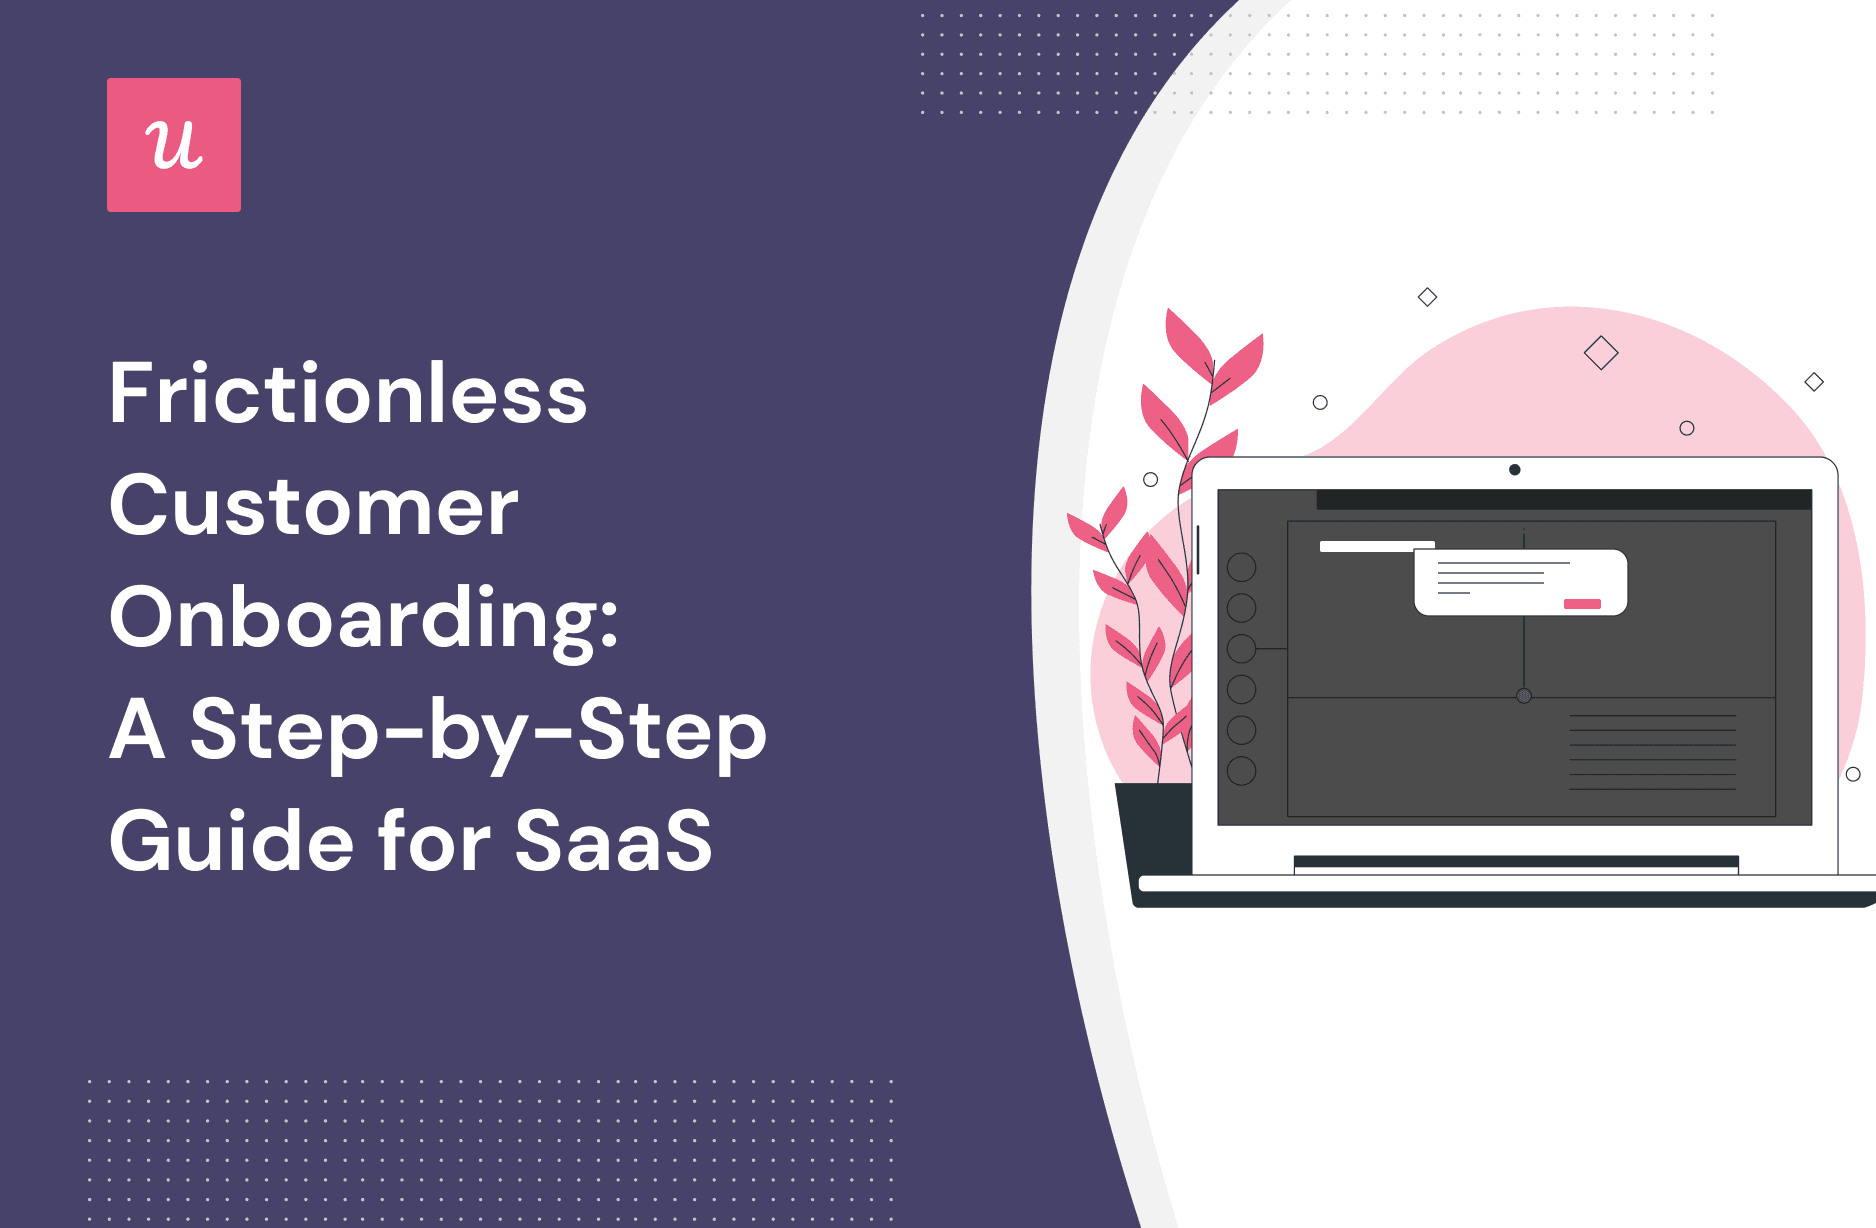 Frictionless Customer Onboarding: A Step-by-Step Guide for SaaS cover